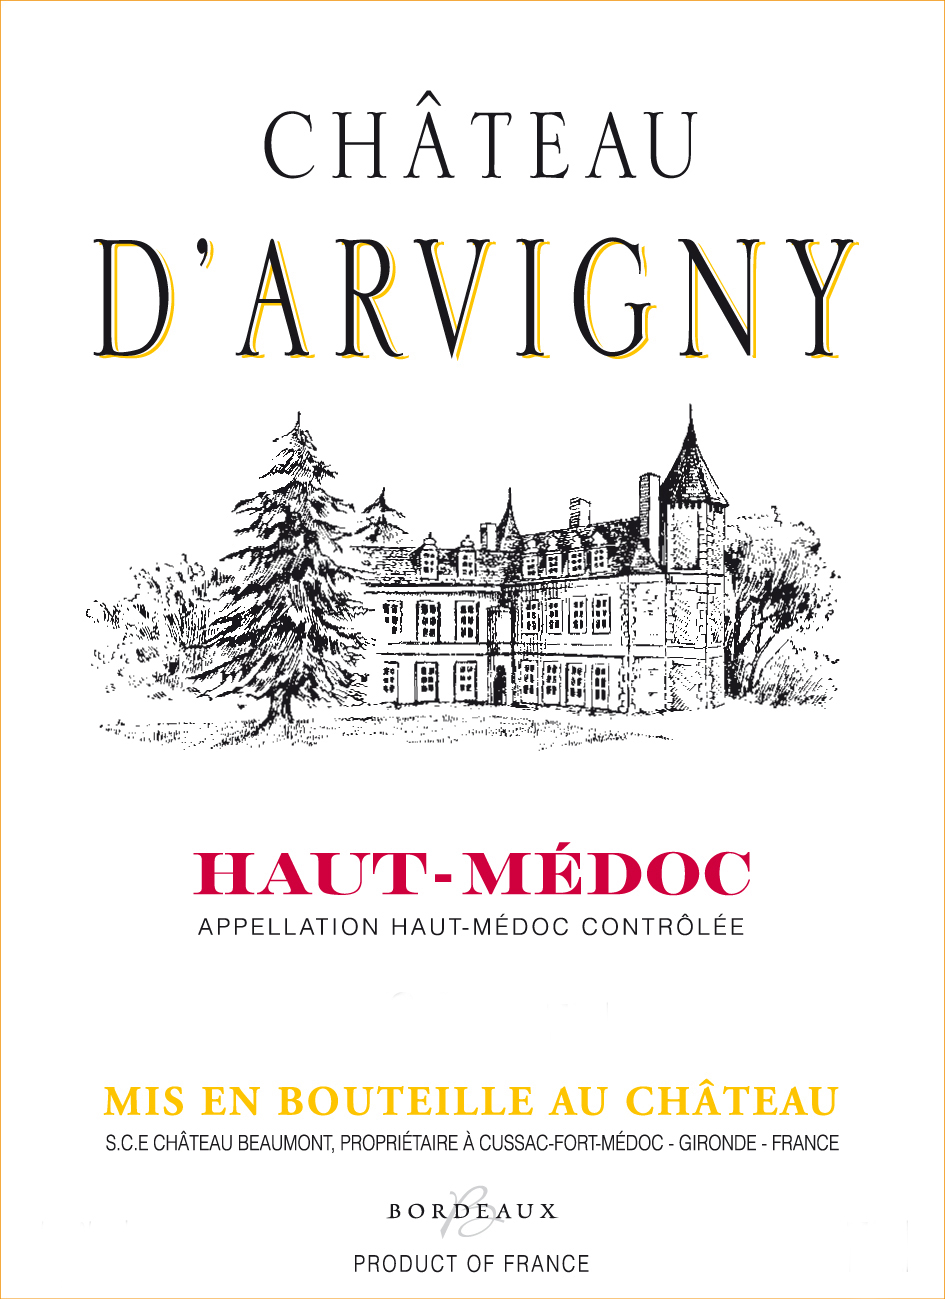 Chateau D'Arvigny label